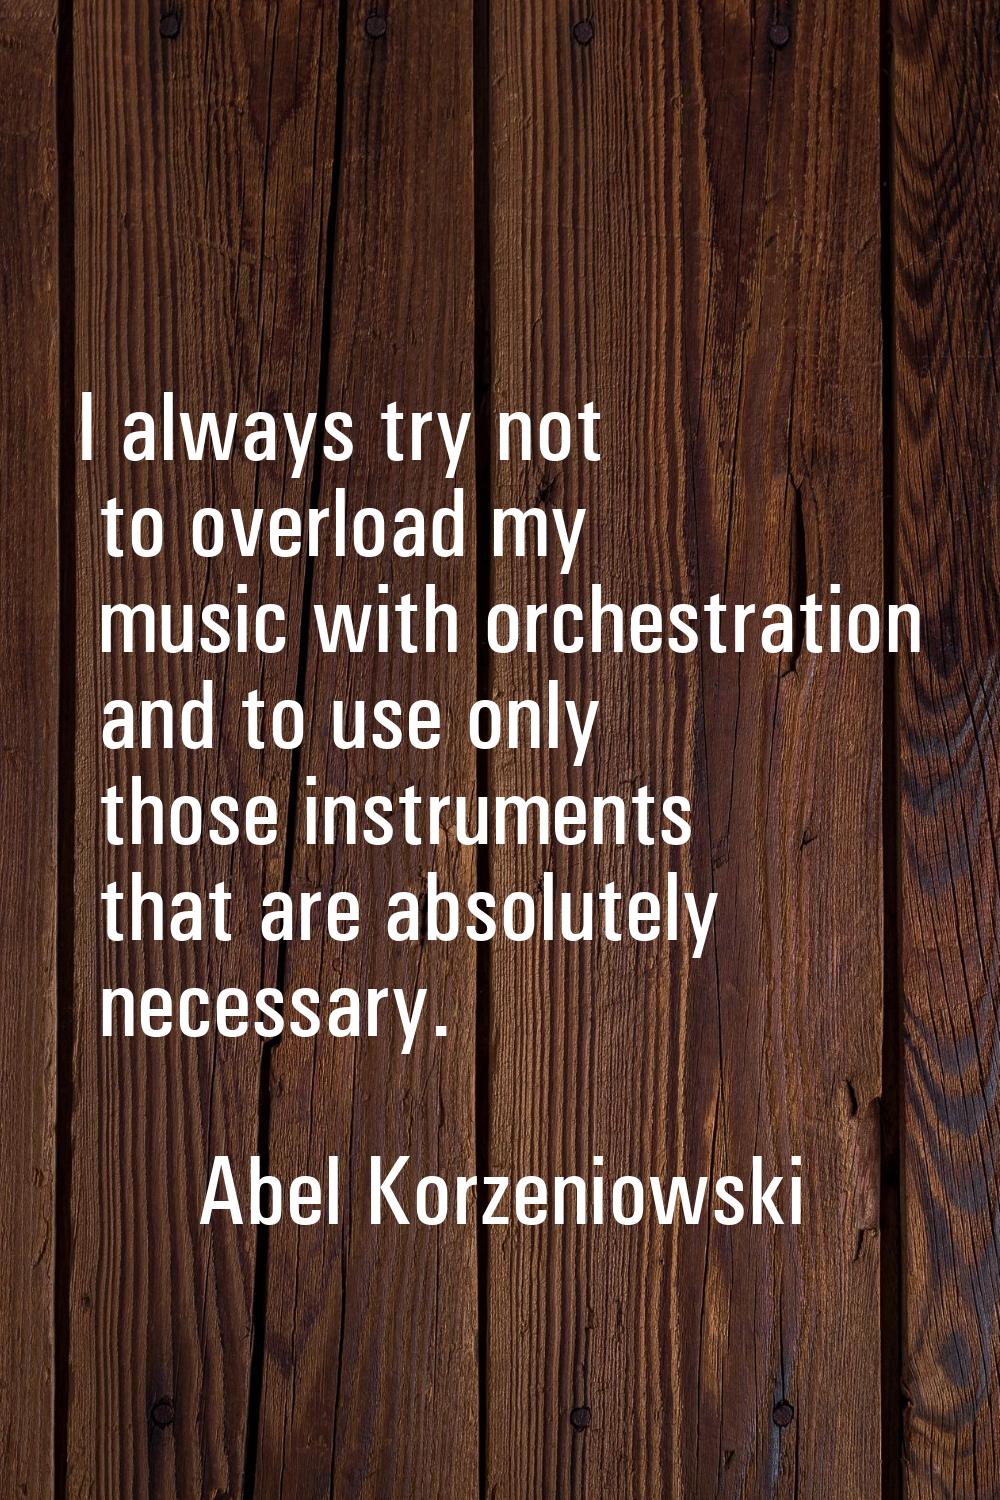 I always try not to overload my music with orchestration and to use only those instruments that are